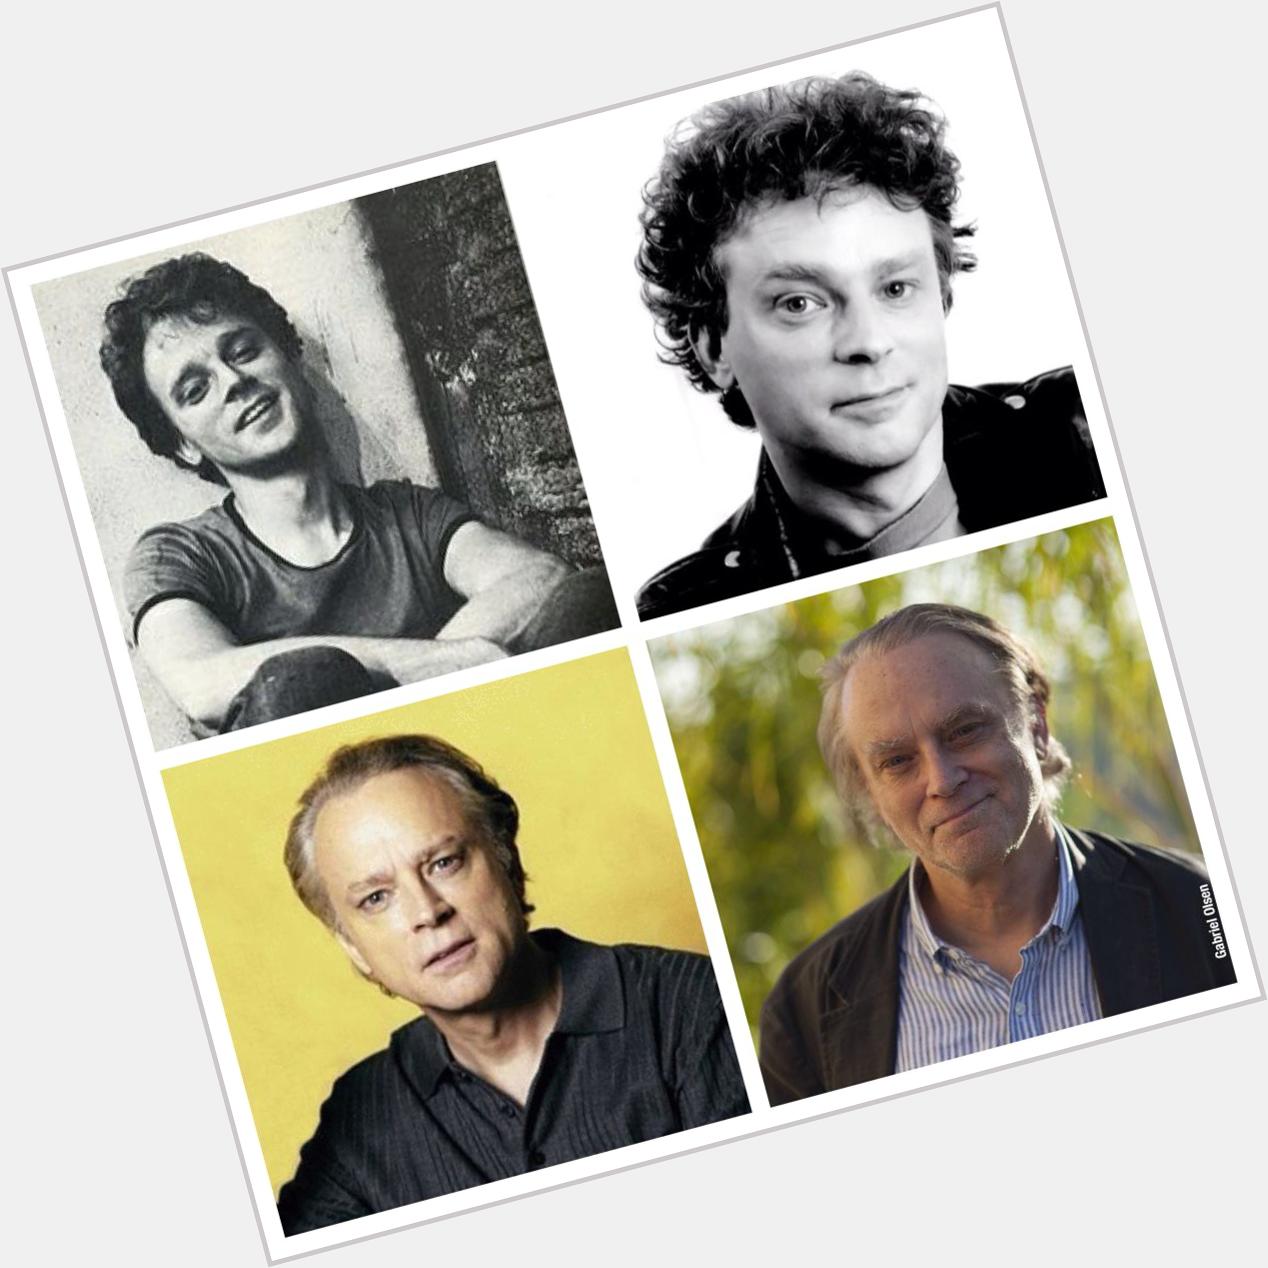 Almost too late with this, but happy 65th birthday to Brad Dourif, my Original Bae 